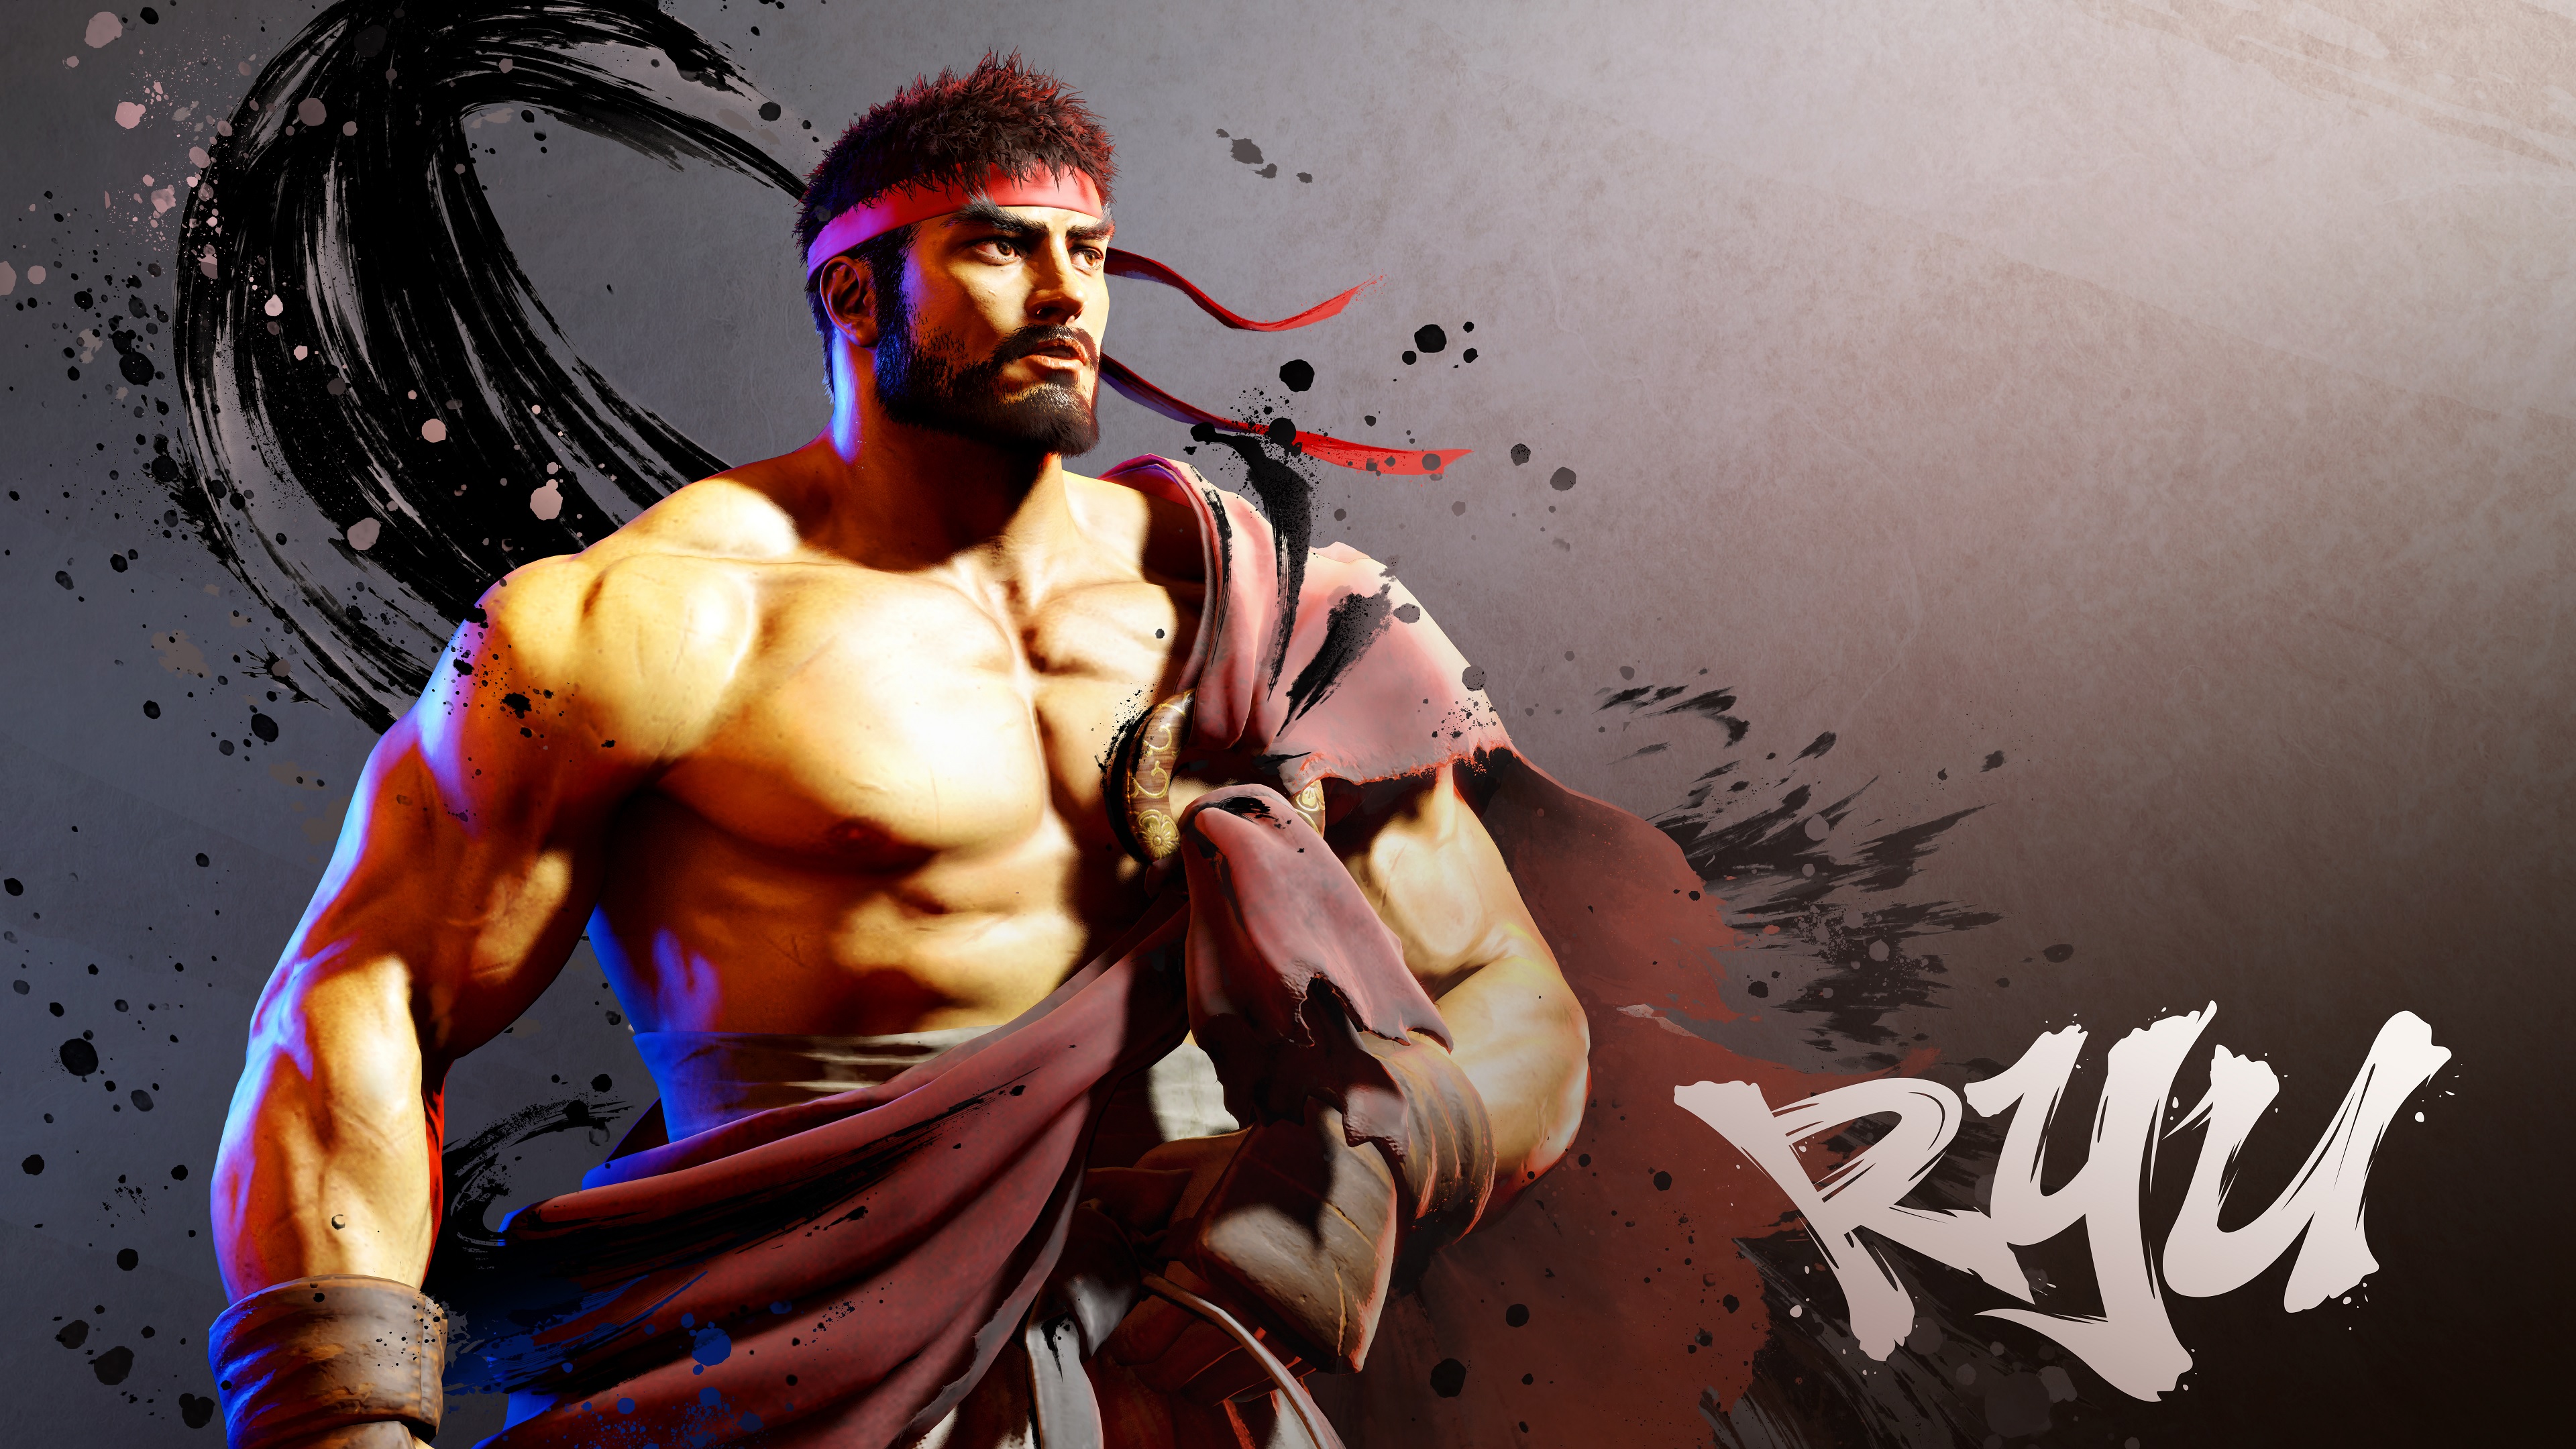 Street Fighter Ryu Wallpapers Photo On Wallpaper 1080p HD  Ryu street  fighter Street fighter characters Street fighter art